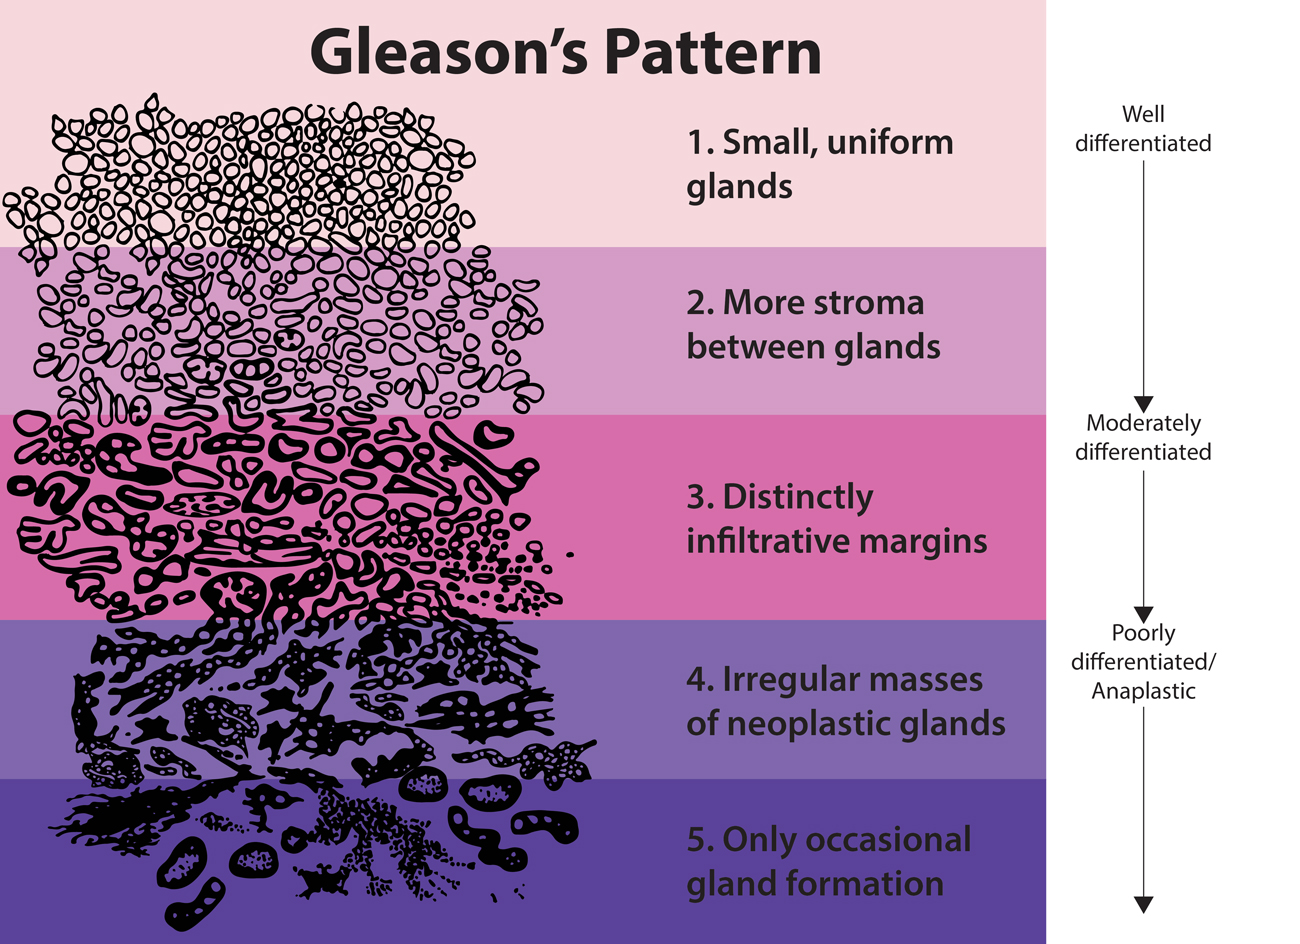 Gleason's Pattern: 1. Small, uniform glands 2. More stroma between glands 3. Distinctly infiltrative margins 4. Irregular masses of neoplastic glands 5. Only occastional gland formation